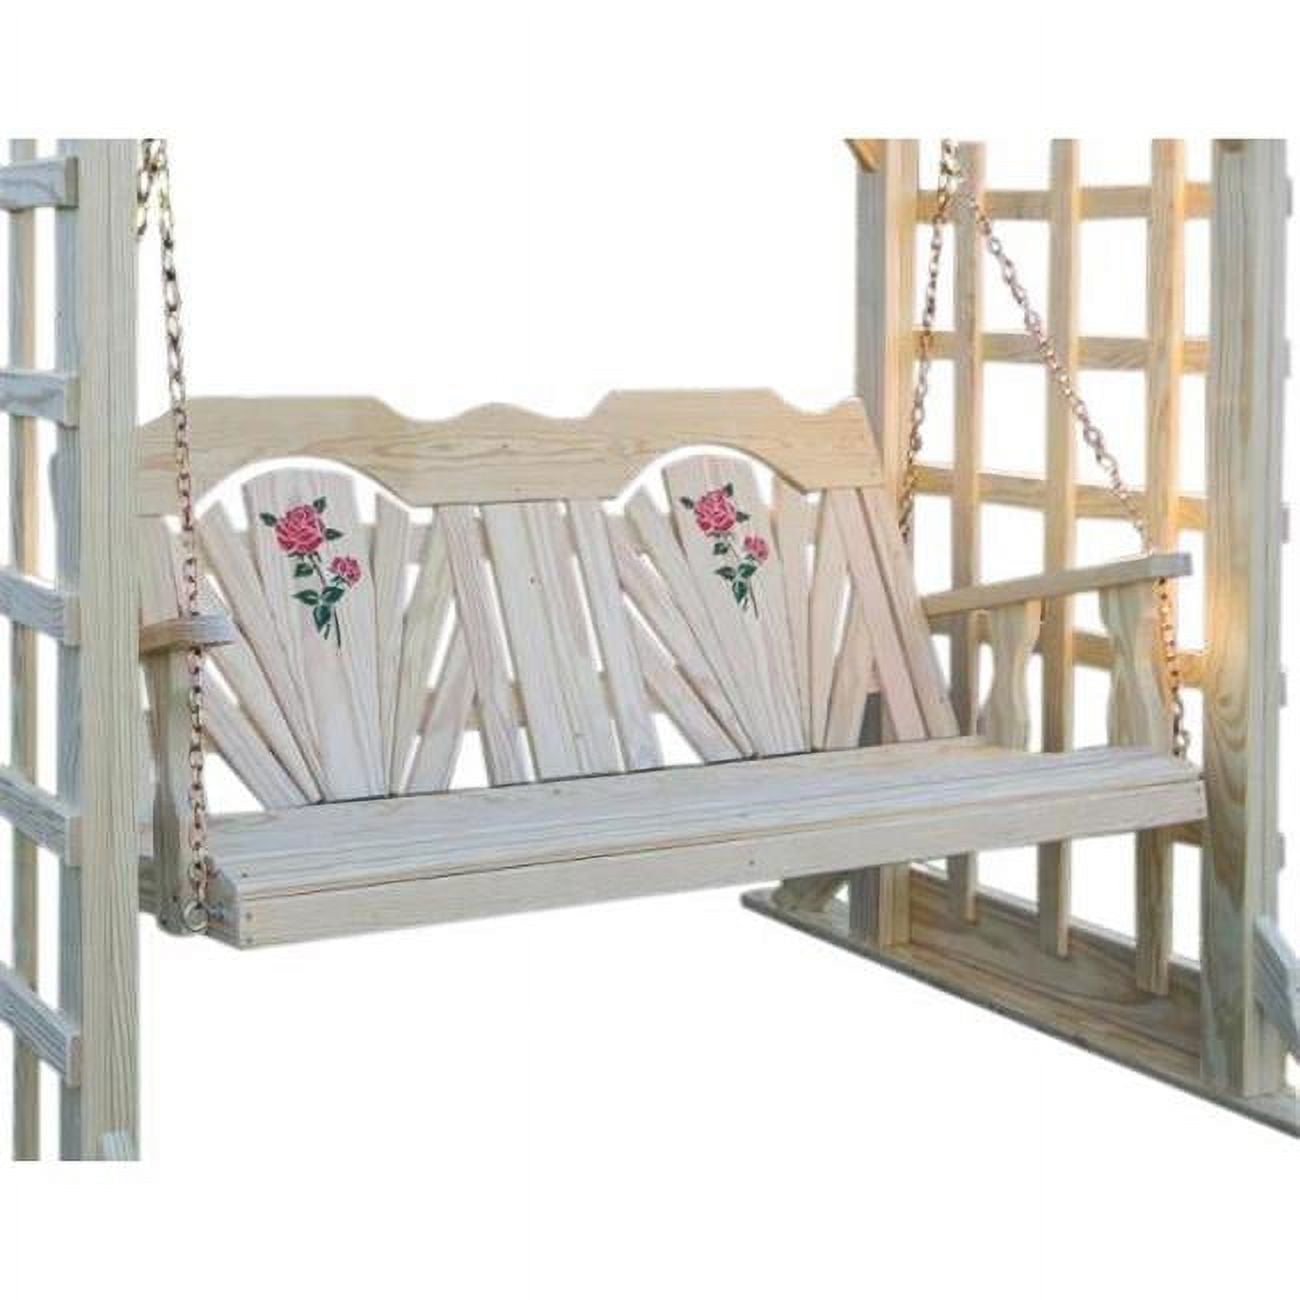 Picture of Creekvine Designs FS60FBROSECVD 64 in. Rose Design with Treated Pine Fanback Swing